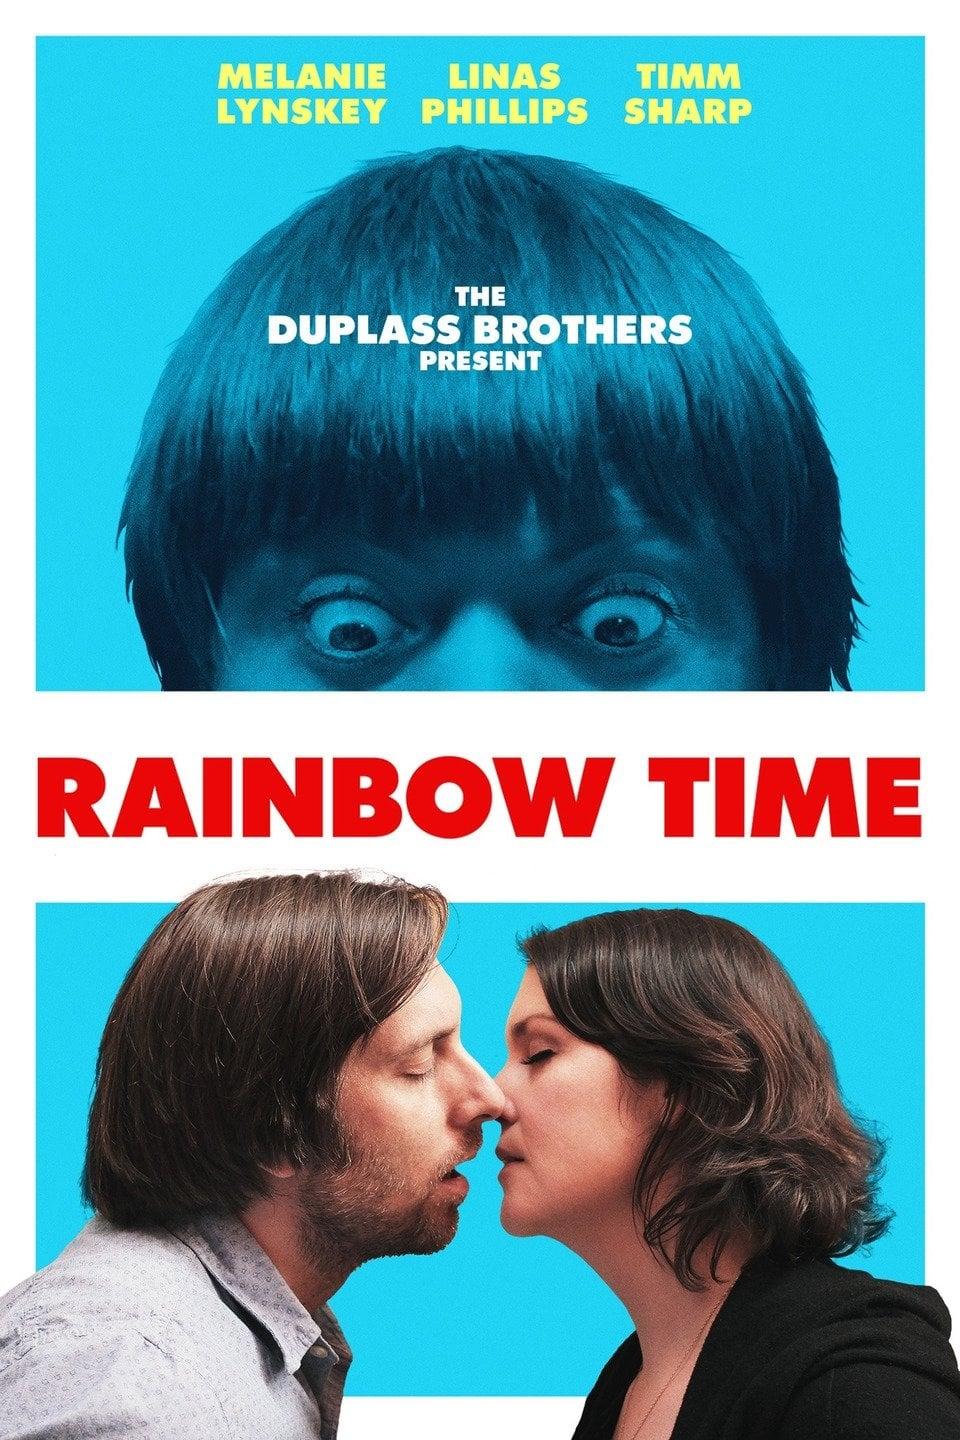 Rainbow Time poster